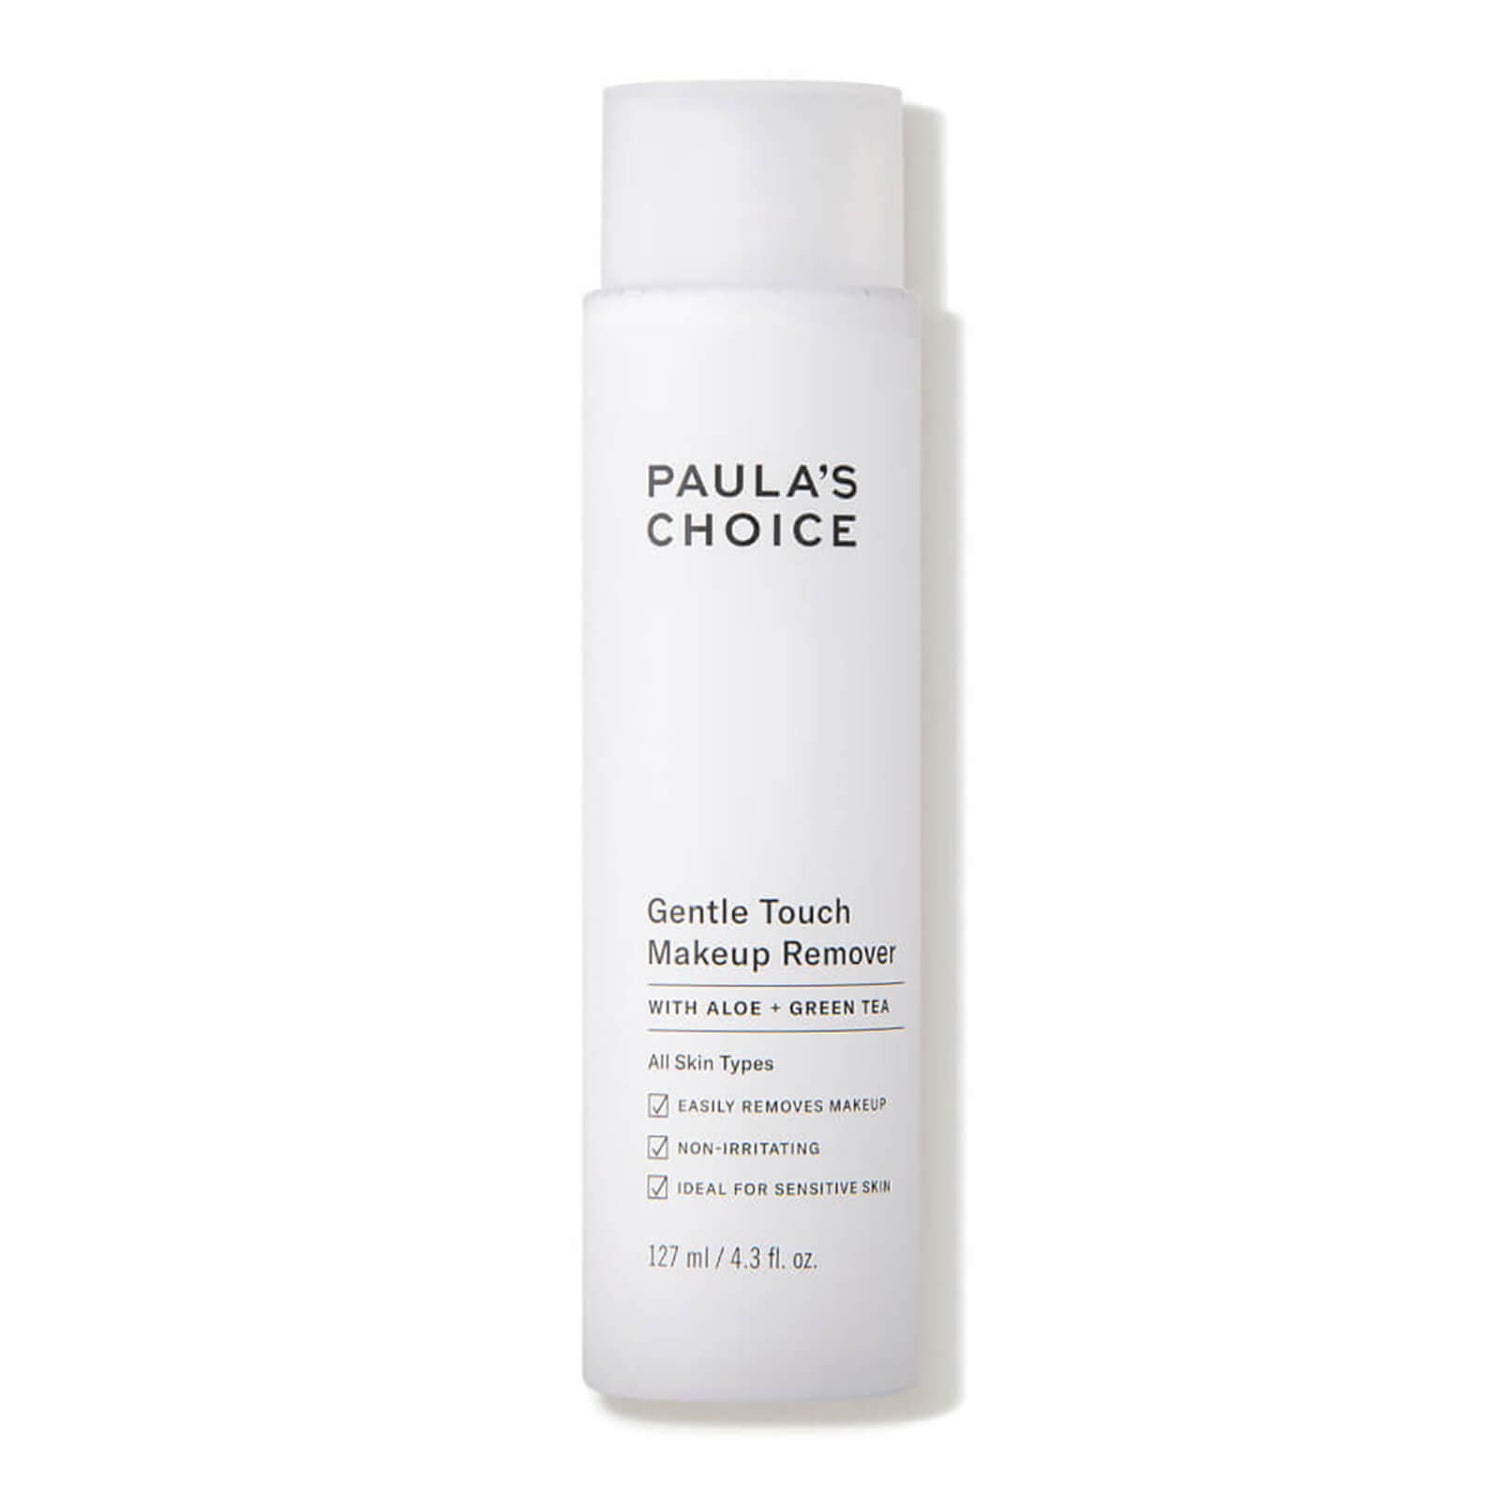 adgang Permanent ordlyd Paula's Choice GENTLE TOUCH Makeup Remover (4.3 fl. oz.) - Dermstore